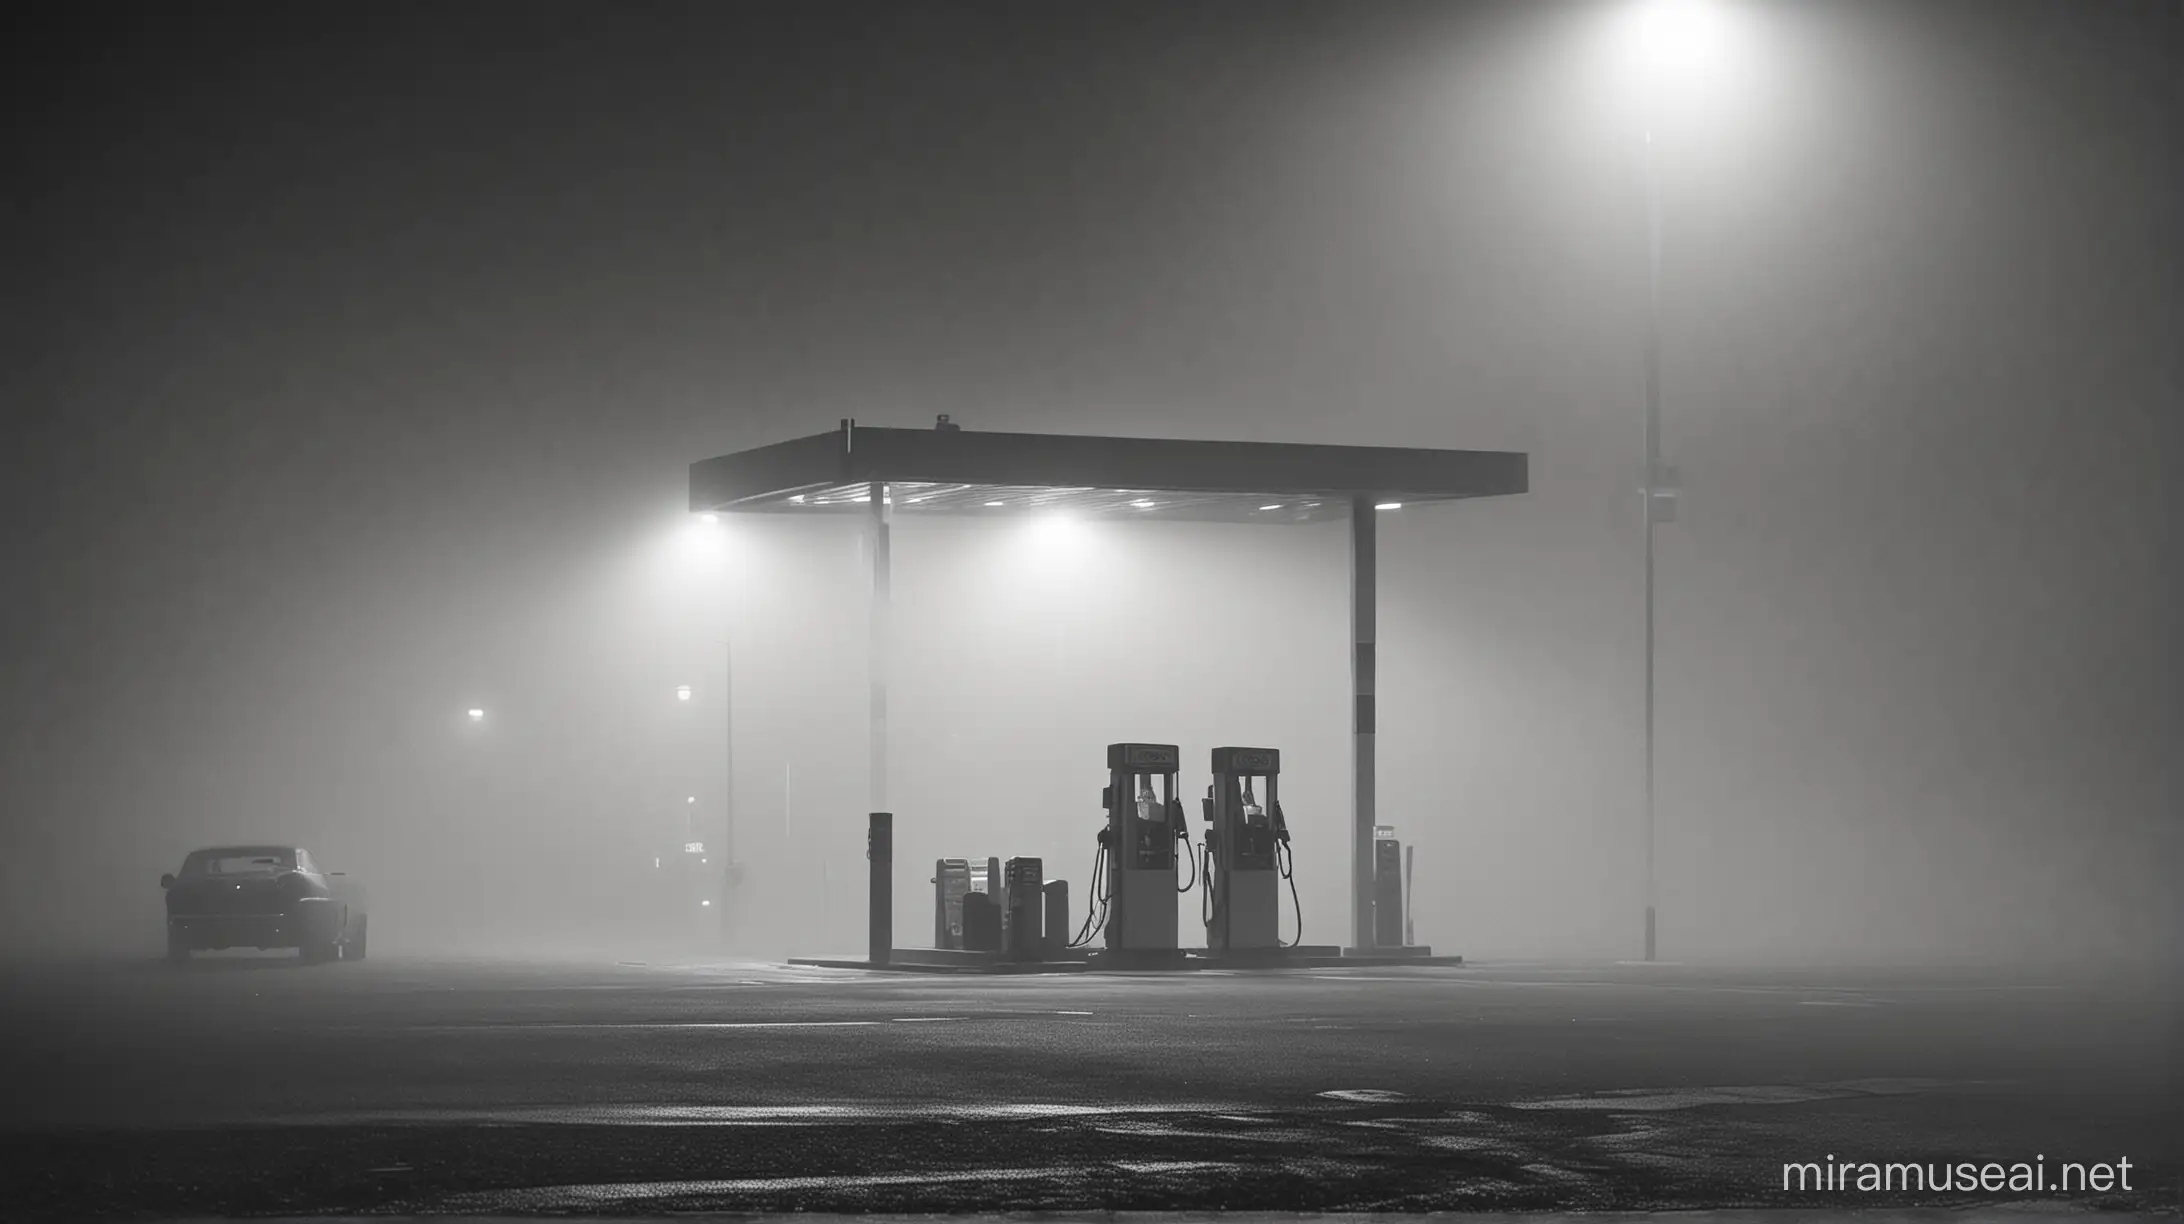 Eerie Night at Abandoned Gas Station Marks Midnight Stop